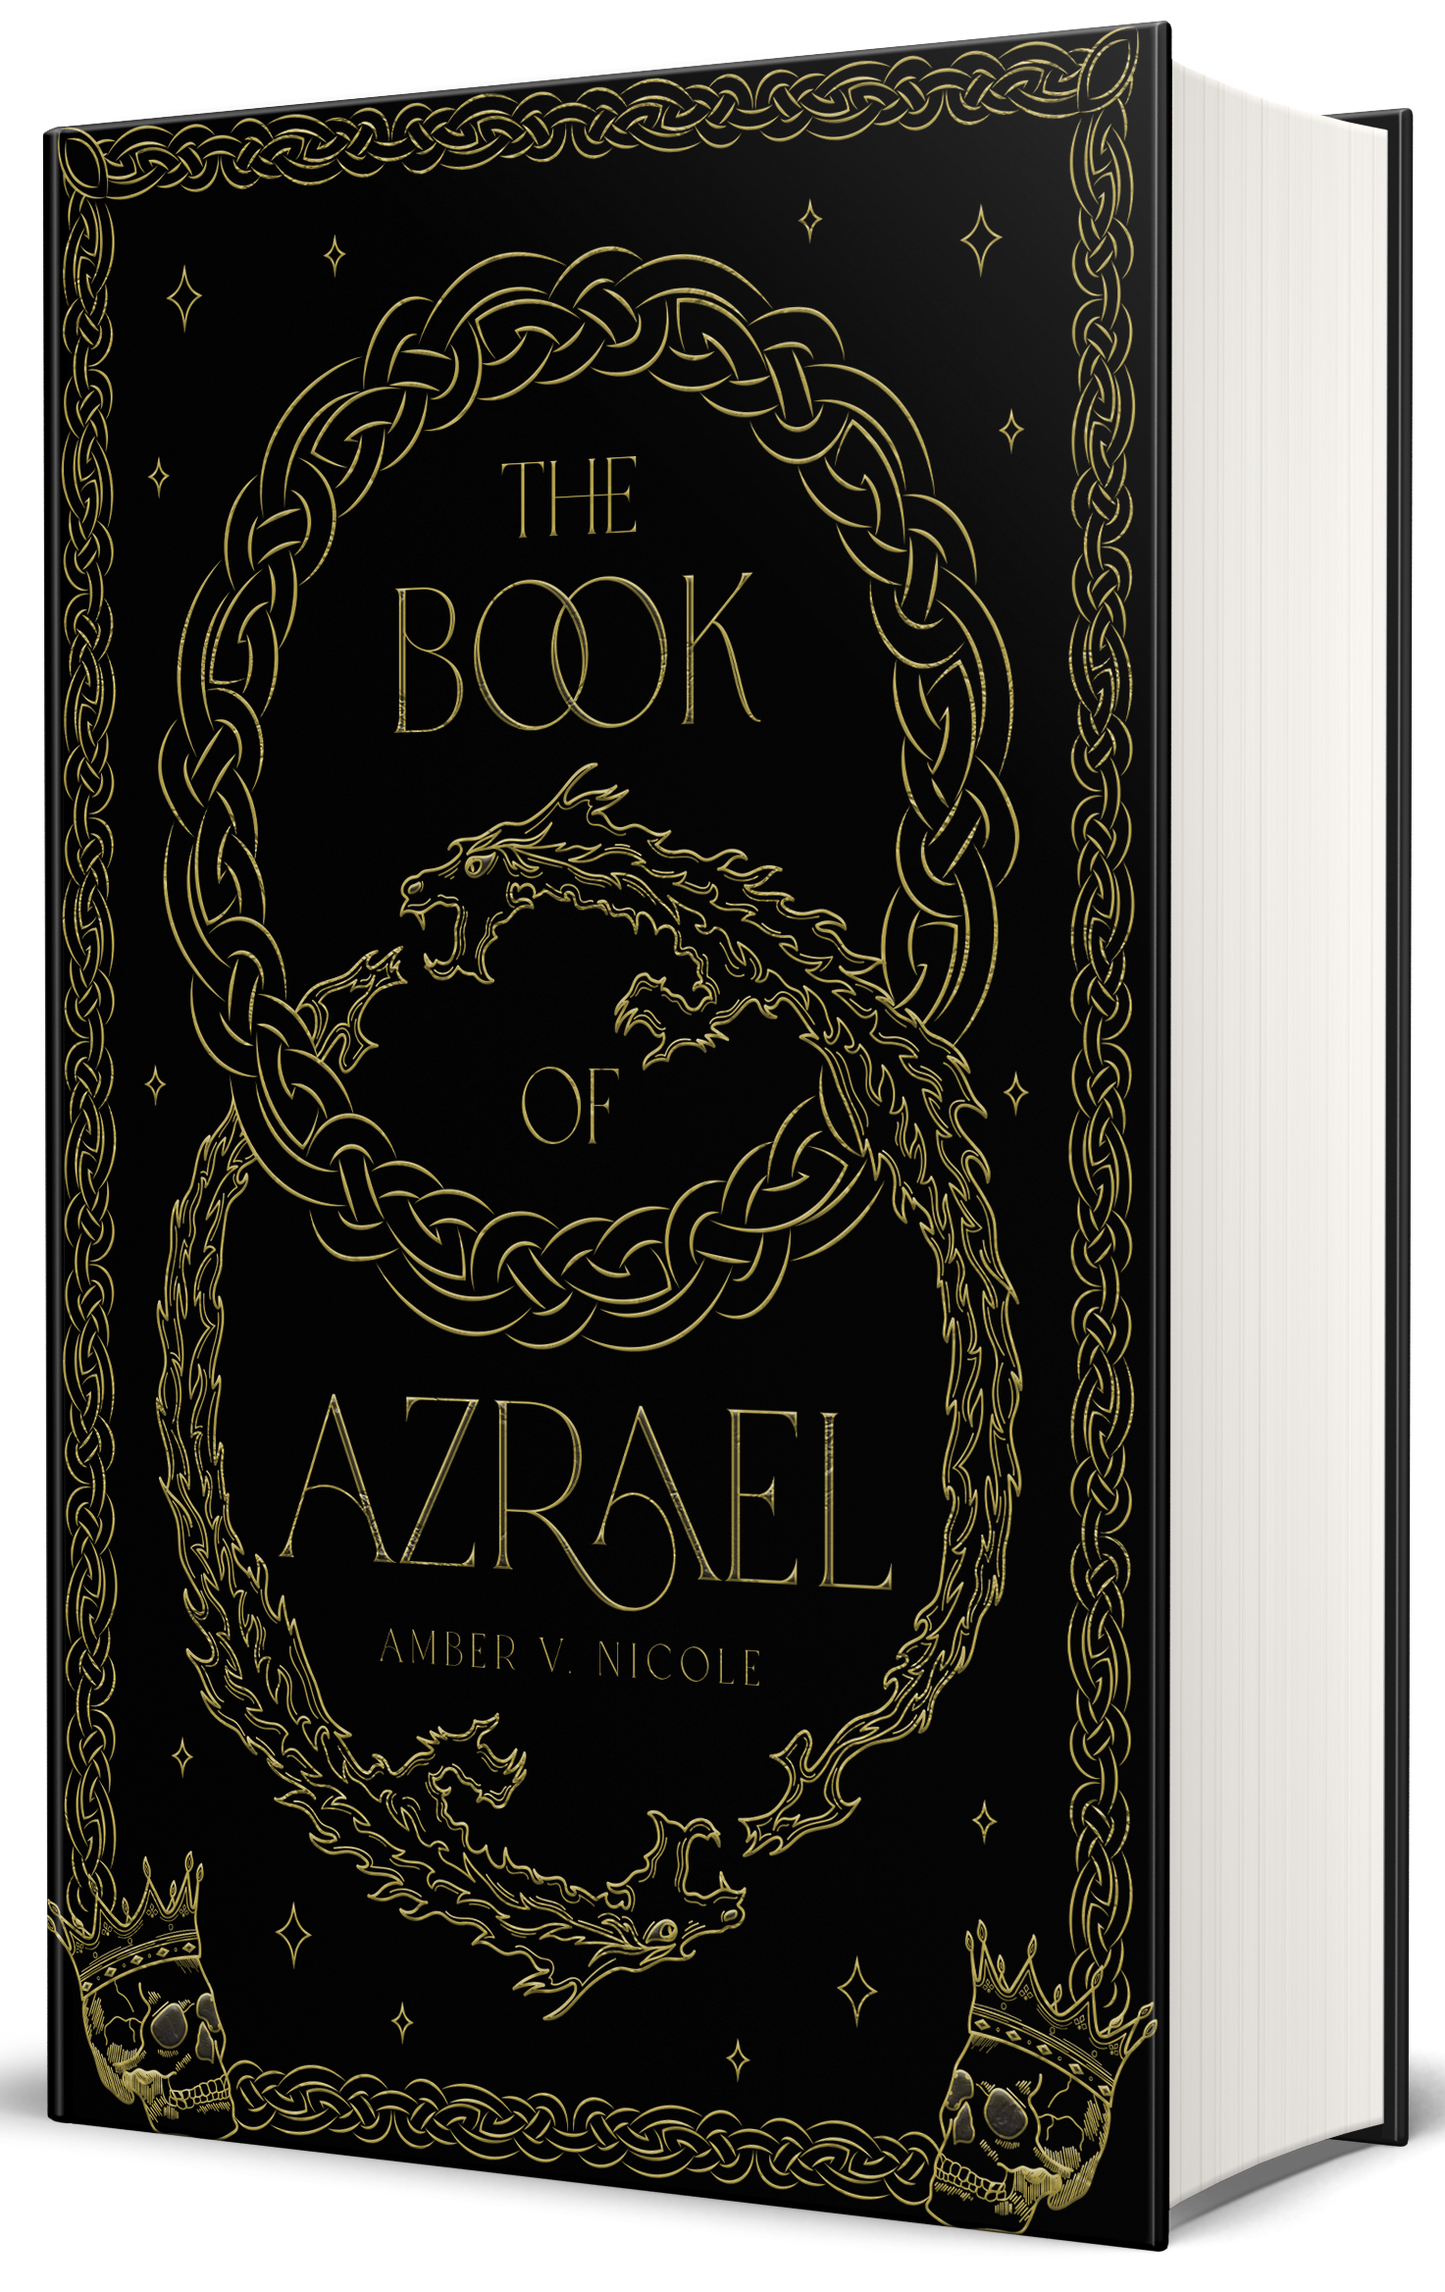 ✨PREORDER FOR PICKUP ✨ RARE Edinburgh Signing Exclusive of The Book of Azrael